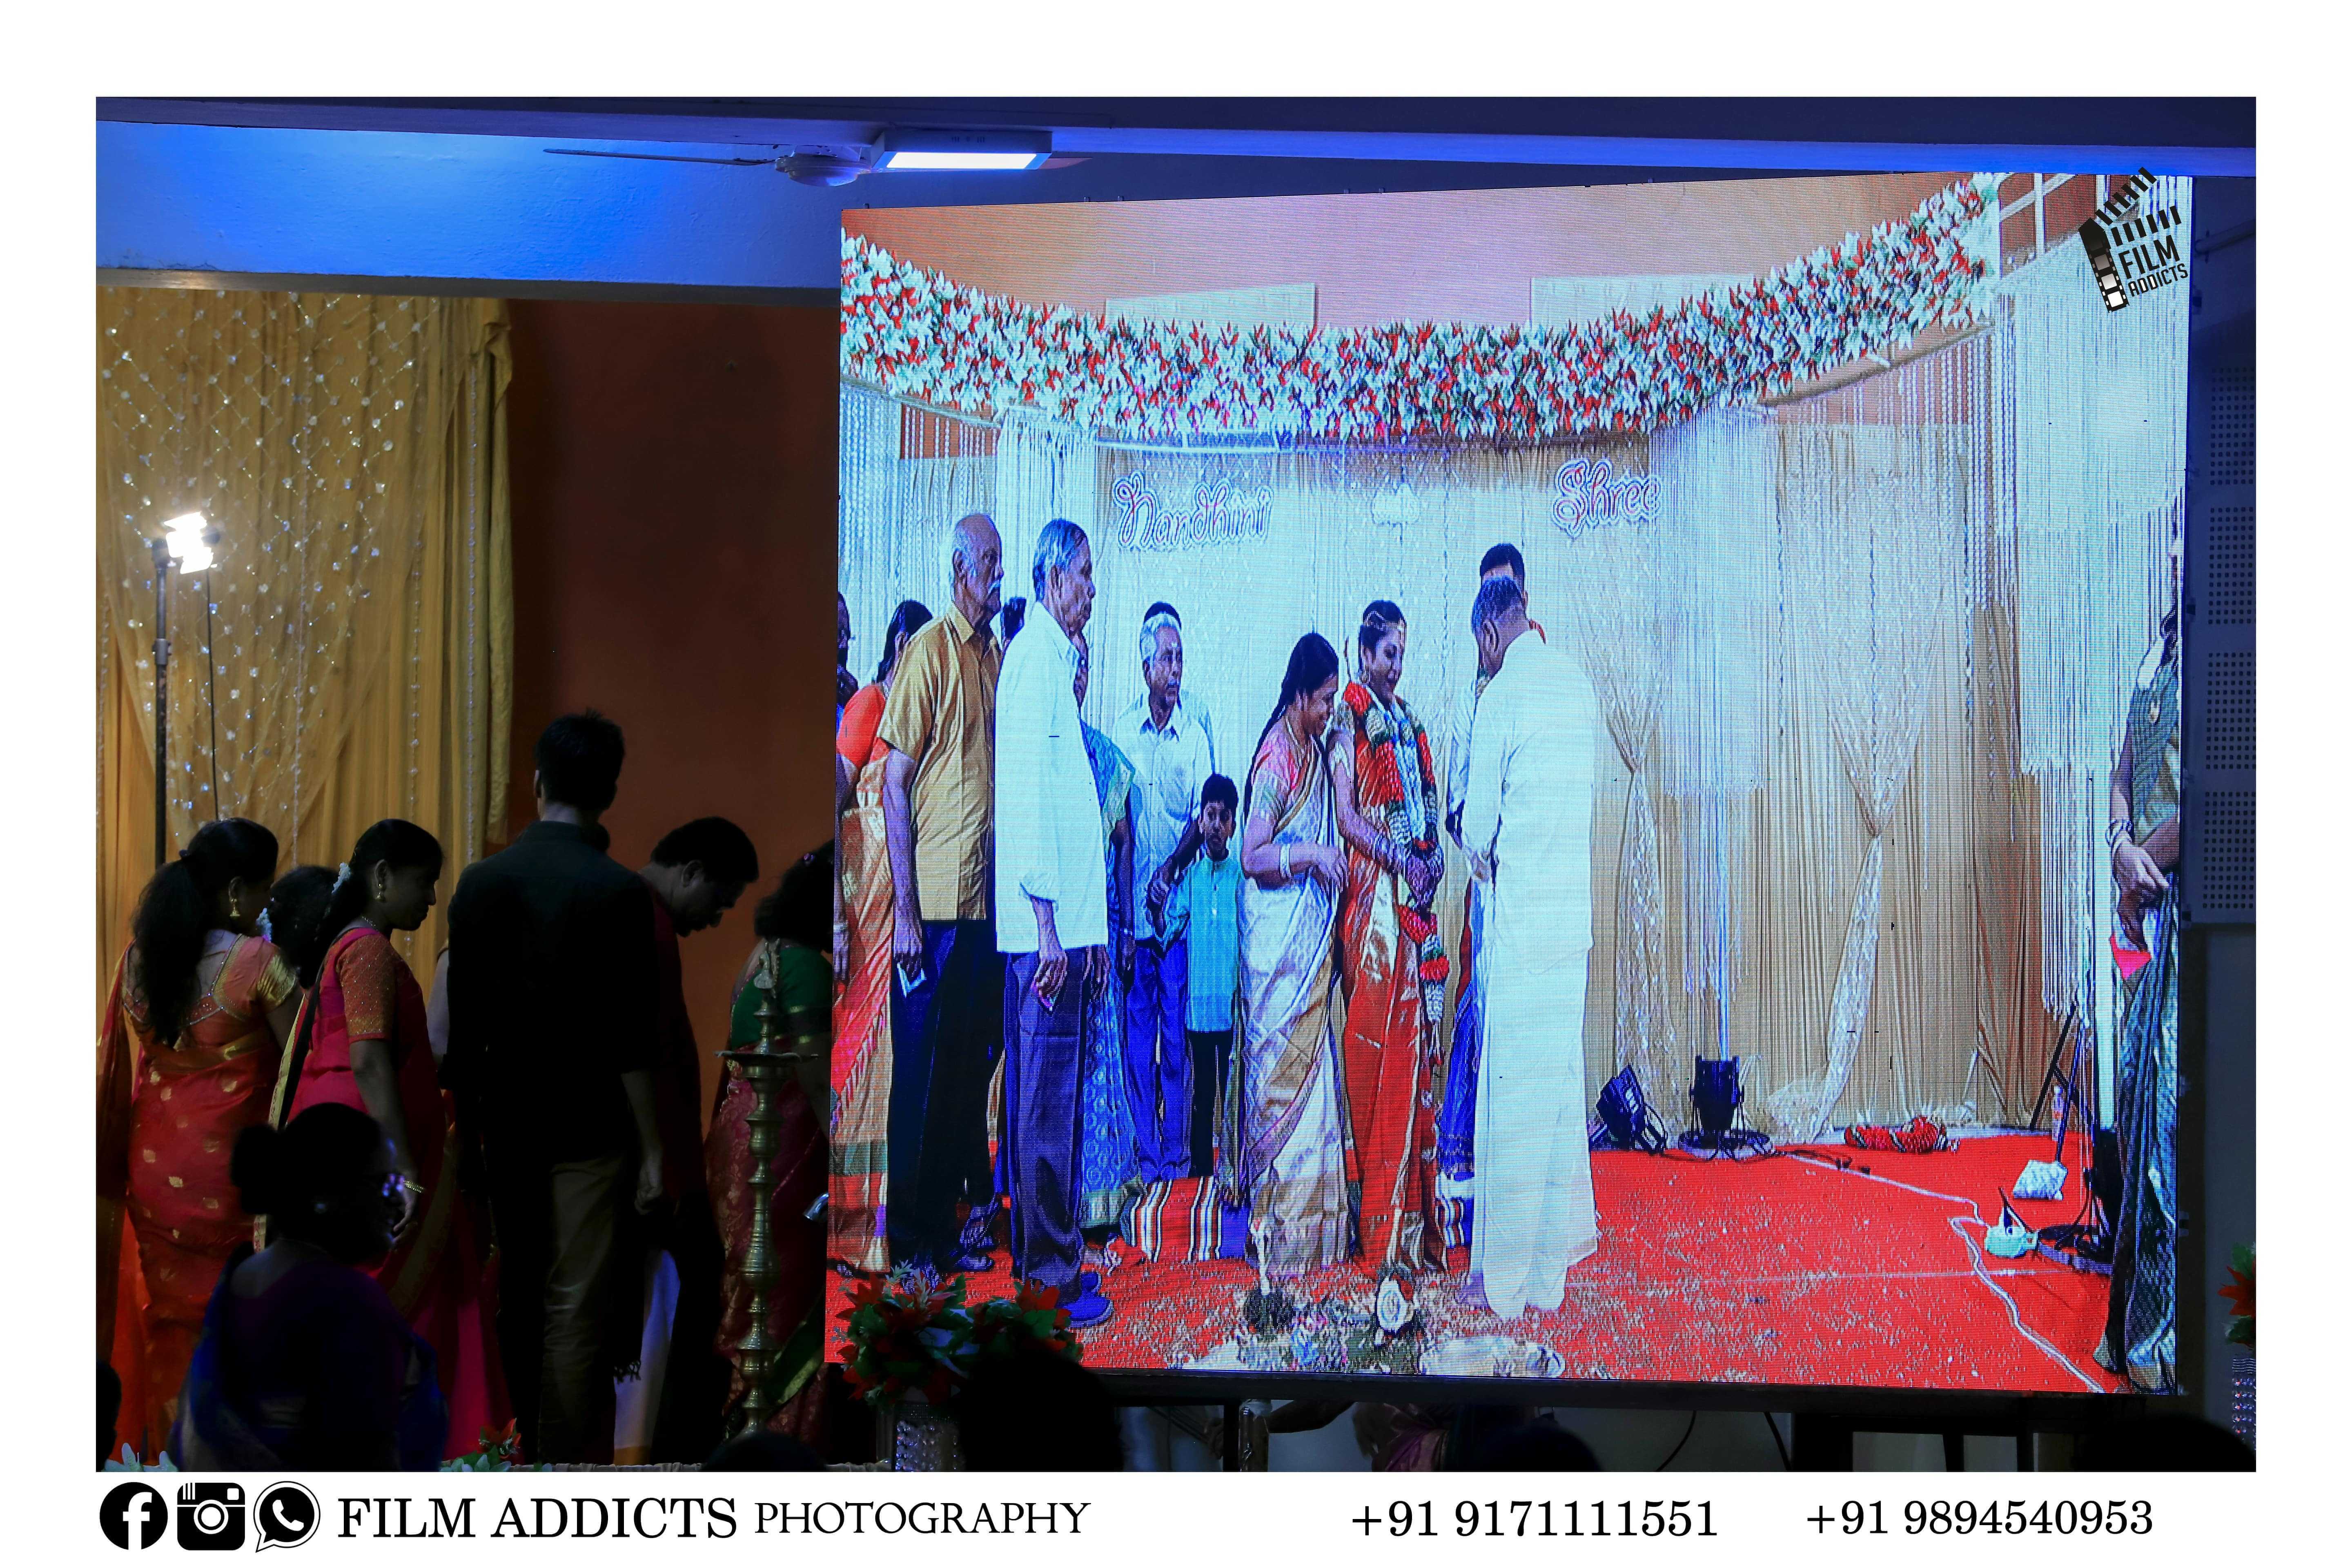 Led wall in sivagangai, Led wall rental in sivagangai, Led wall display in sivagangai, Led wall wedding in sivagangai, Led wall for wedding reception, Led wall event in sivagangai, Led wall event management in sivagangai, Led video wall for events in sivagangai, led video wall rental in sivagangai, wedding led video wall rental & hiring sivagangai, marriage led video wall rental & hiring in sivagangai, wedding led screen rental sivagangai, marriage led screen sivagangai, indoor & outdoor led video wall in sivagangai, led wall in marriage, led wall rental in sivagangai, led rental, led video wall hiring sivagangai, marriage led screen, wedding led screen rental,live streaming in sivagangai, live streaming, live tv, live streaming wedding, wedding live streaming sivagangai, marriage live streaming sivagangai, live streaming services in sivagangai, live streaming wedding sivagangai.